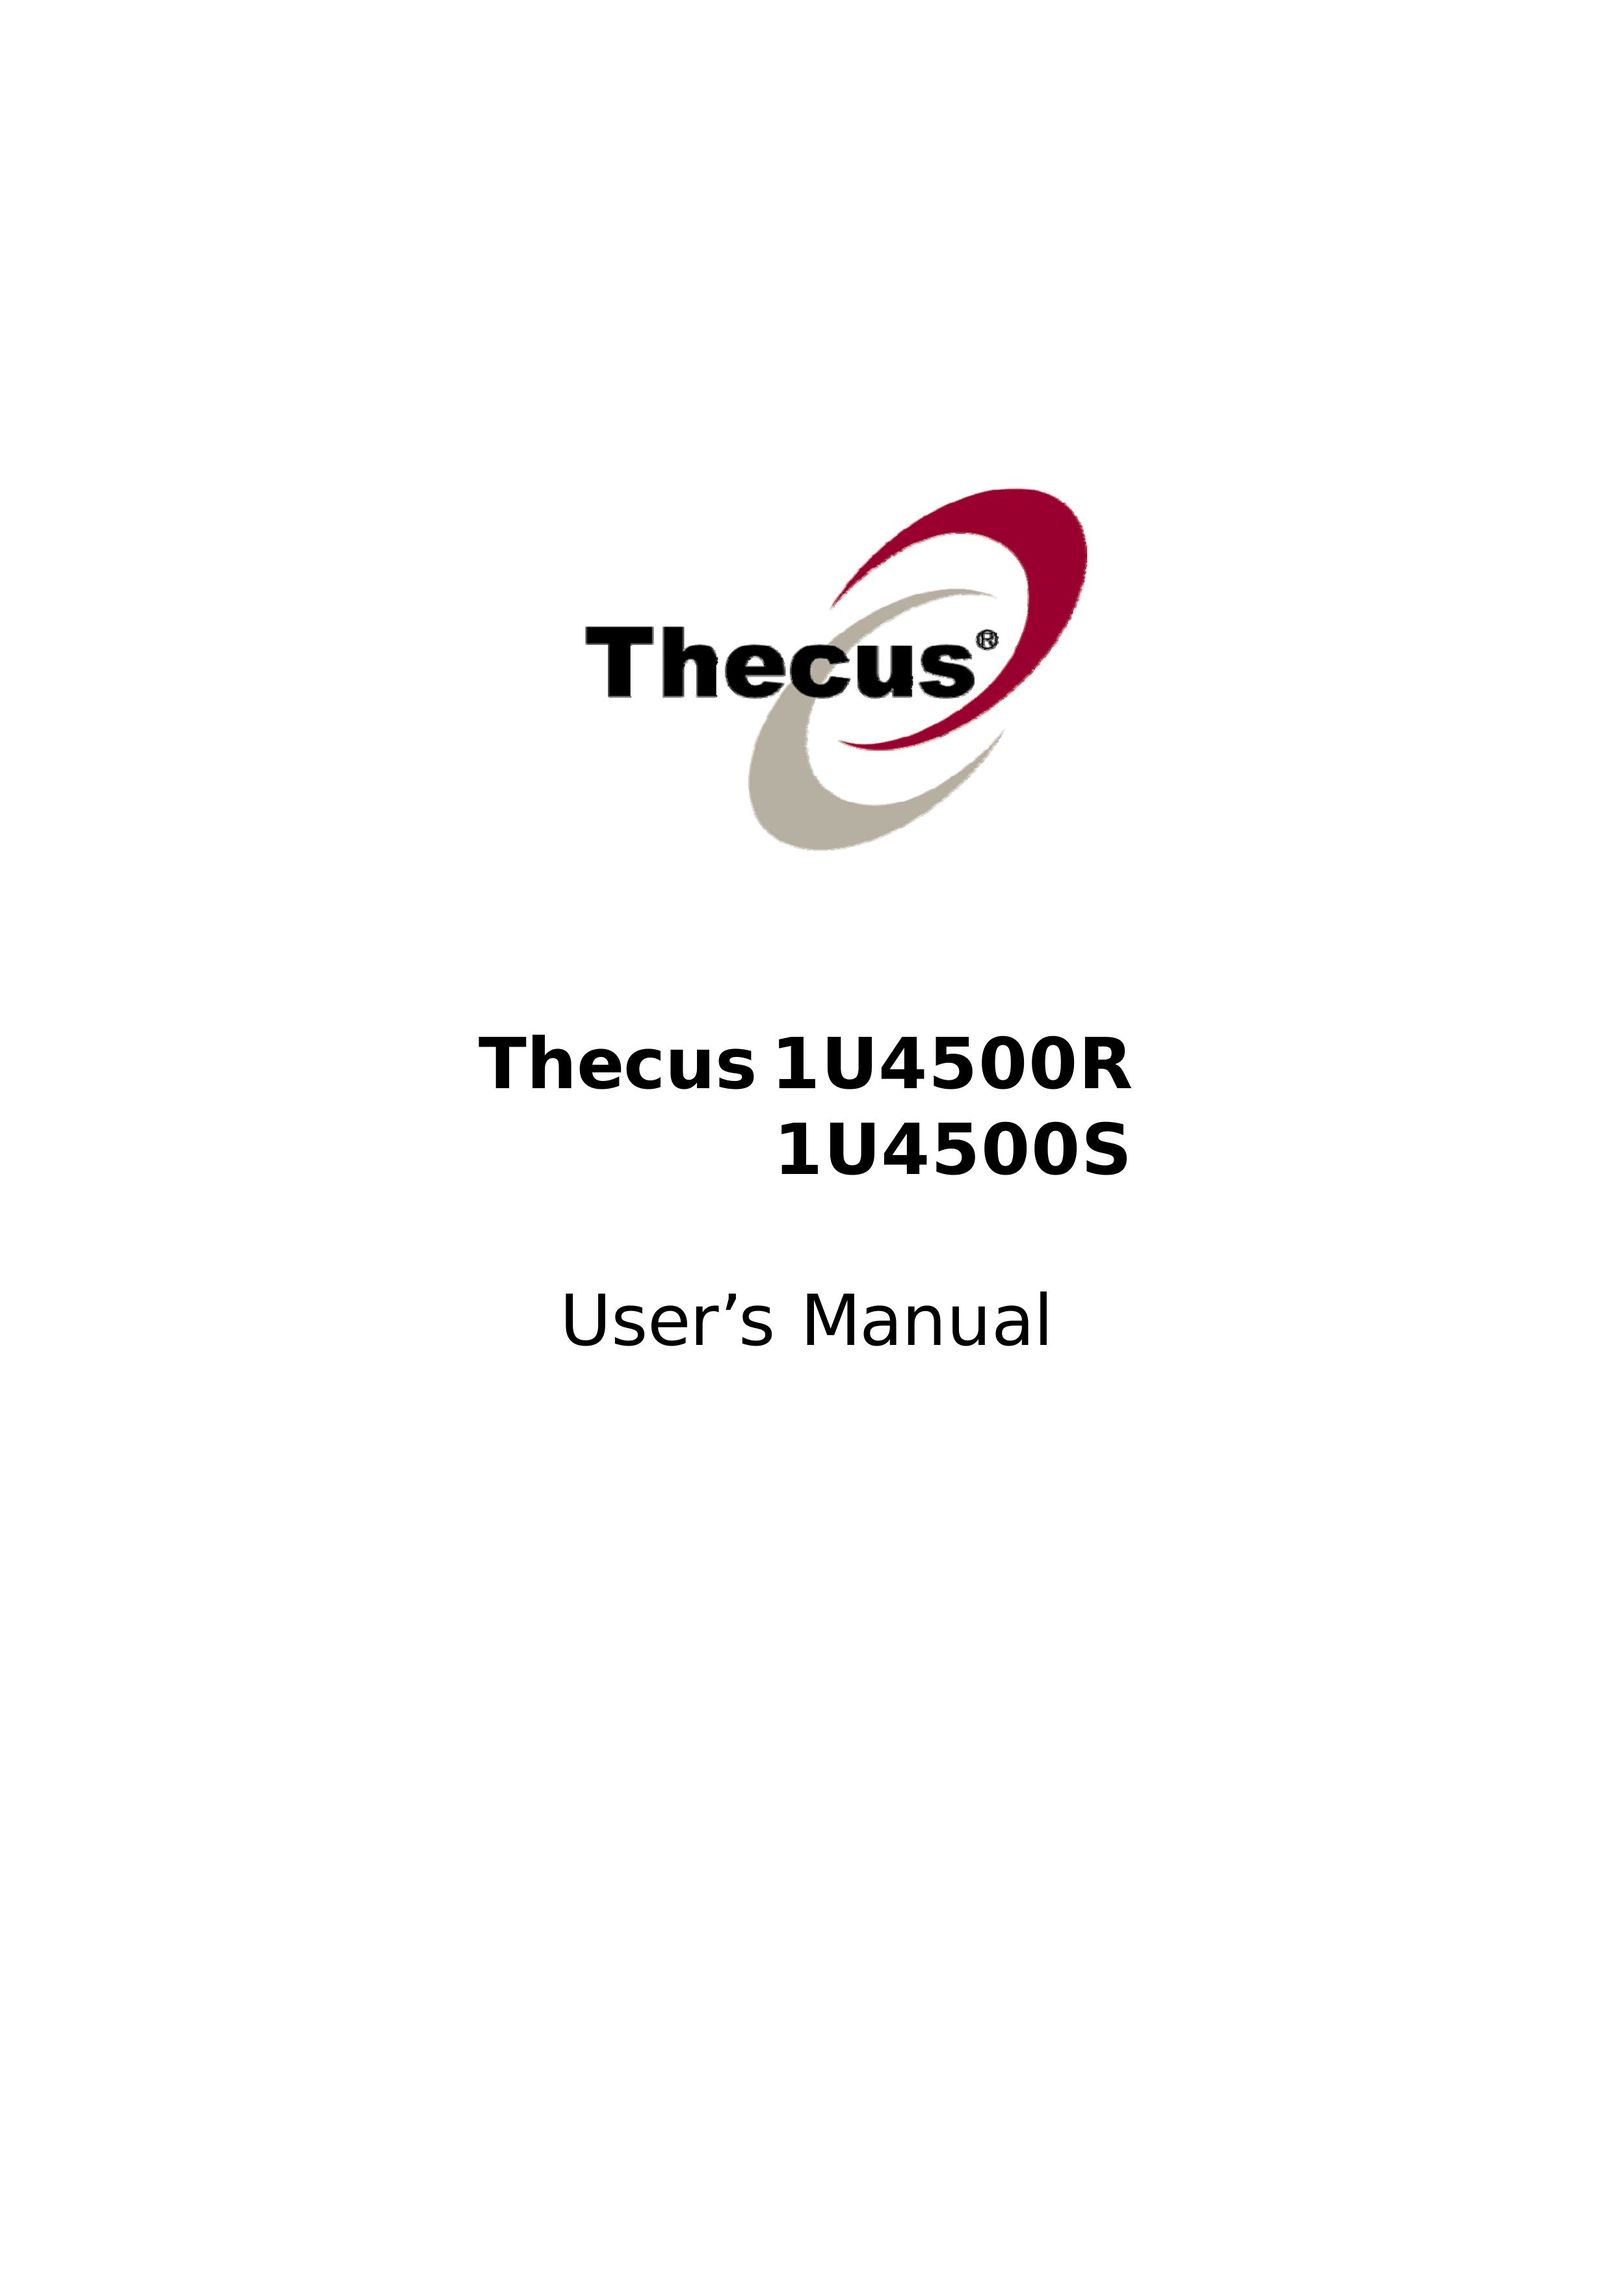 Thecus Technology 1U4500R Network Card User Manual